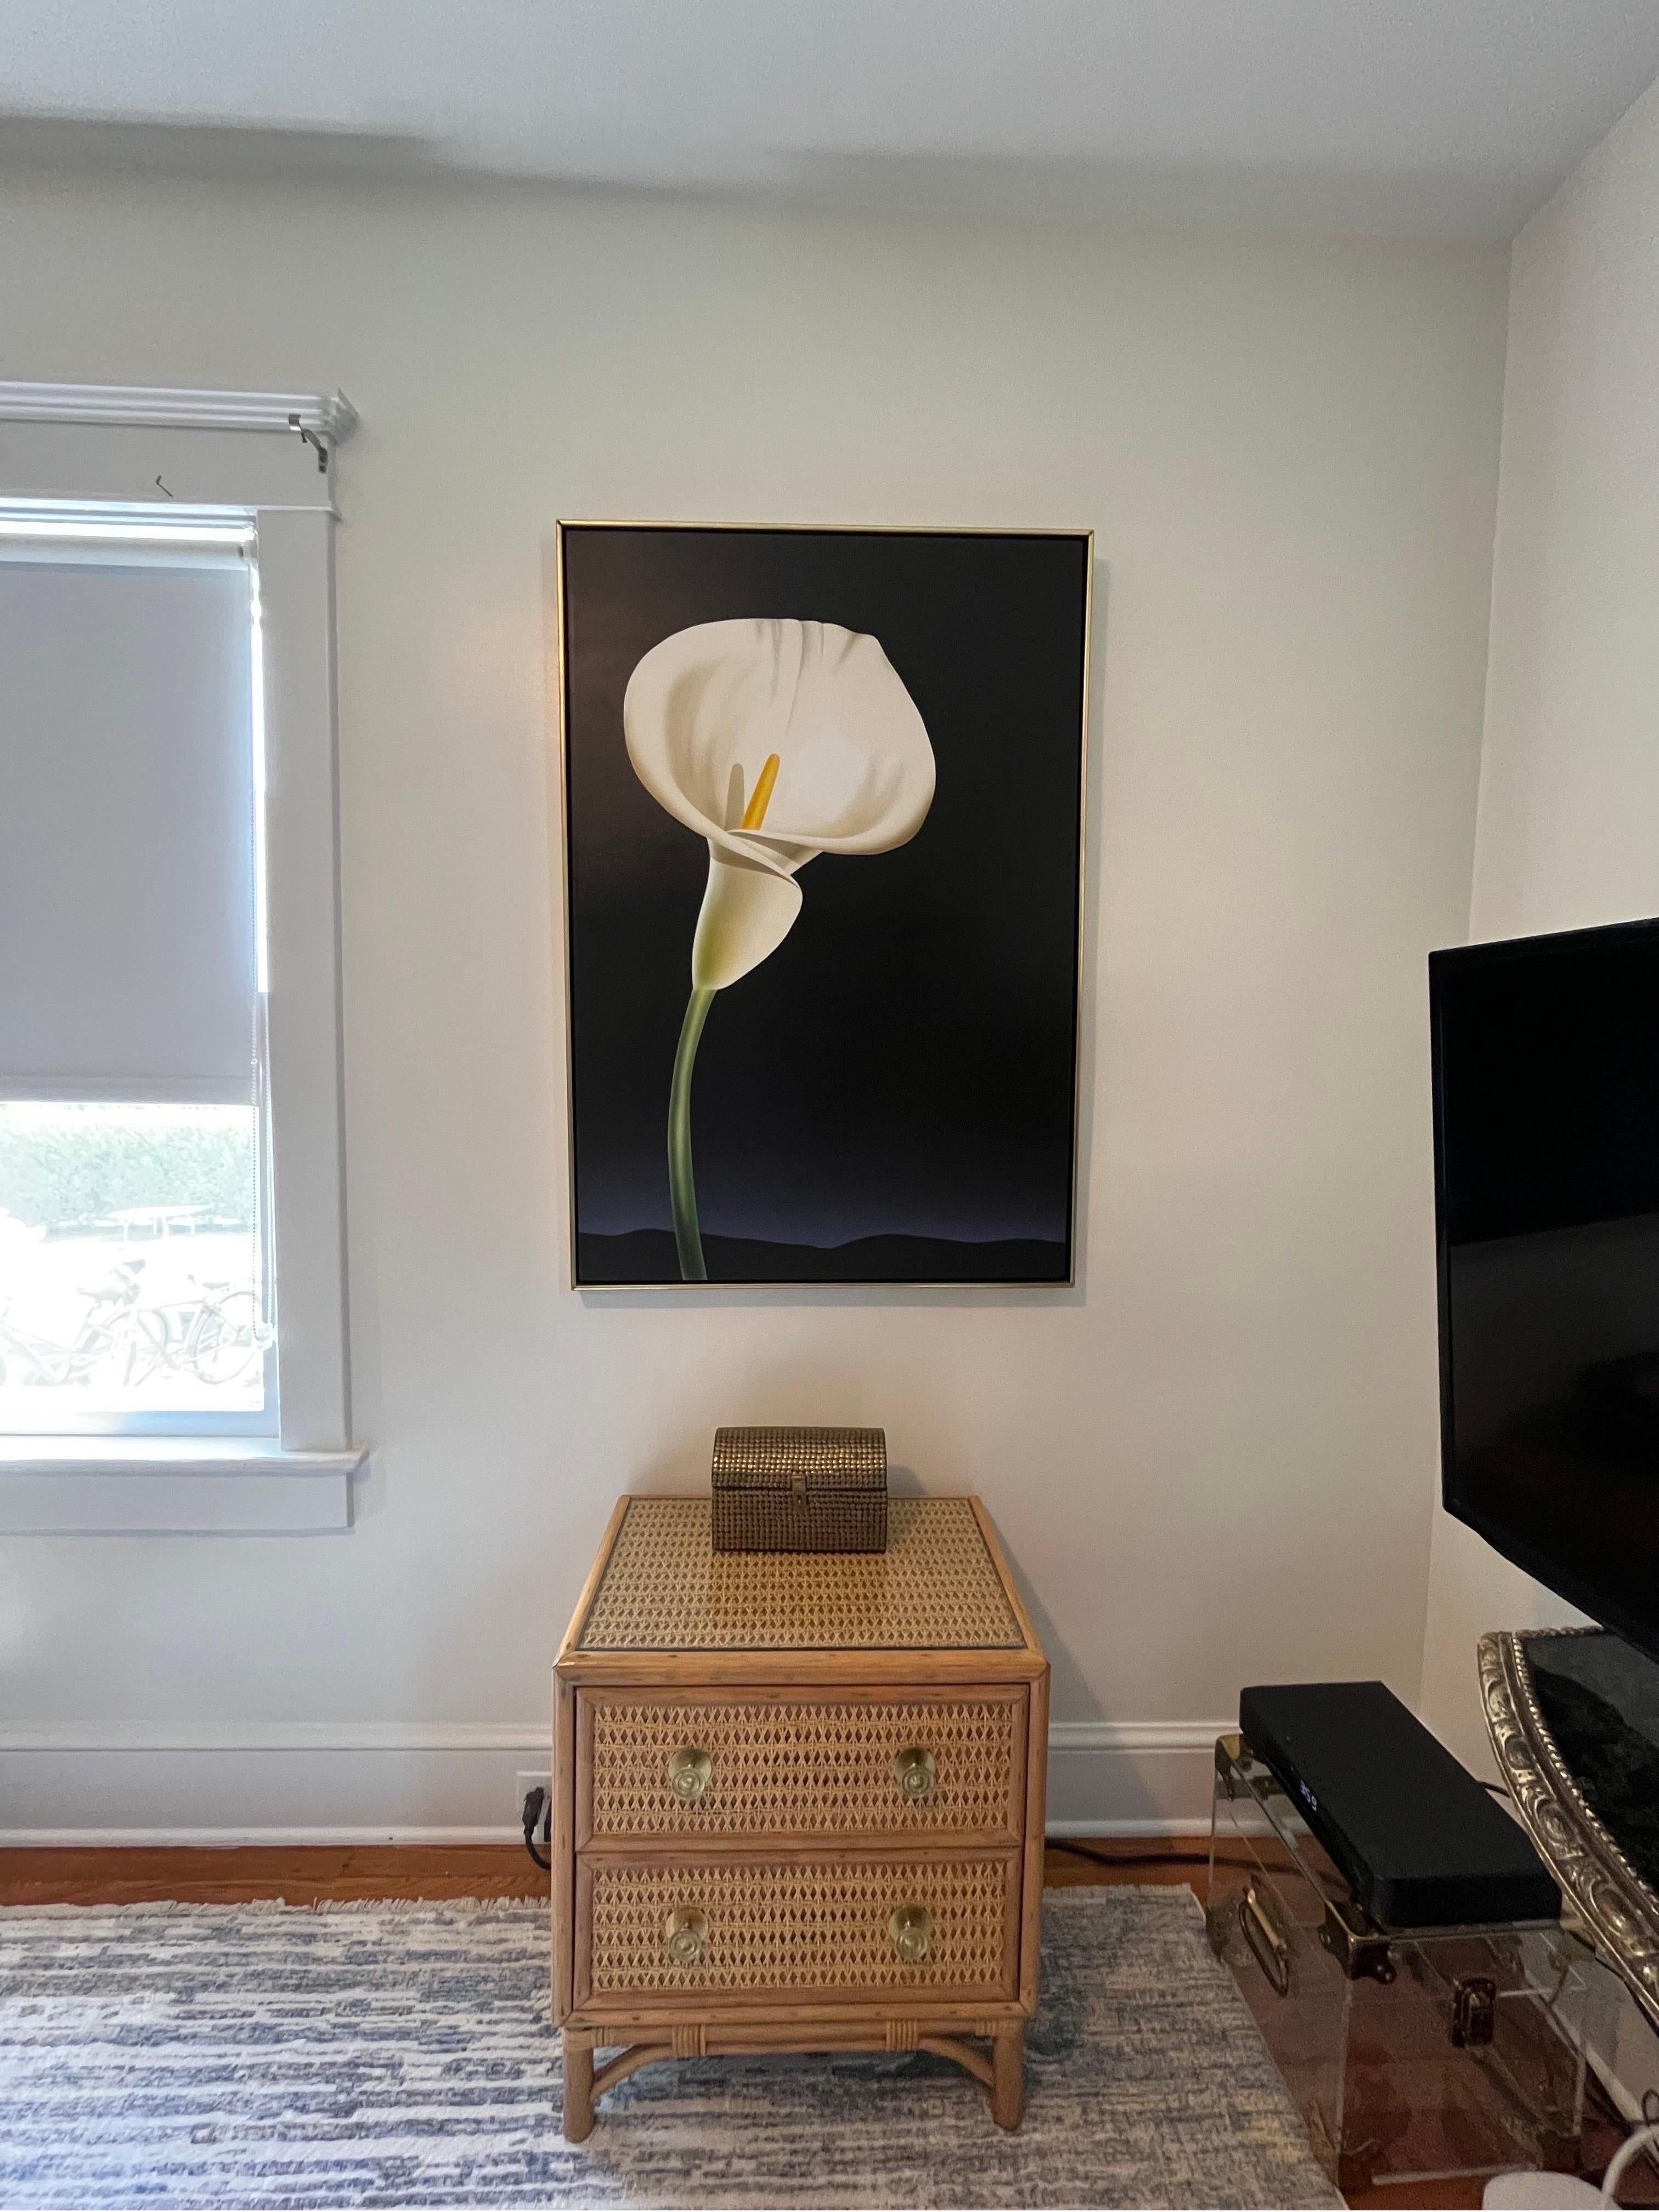 Striking Calla Lily print on canvas. Signed S. Kenny ‘81. Beautiful capture of the allure of the Calla Lily with superb coloring. Natural wood frame with brass piping.
Curbside to NYC/Philly $350